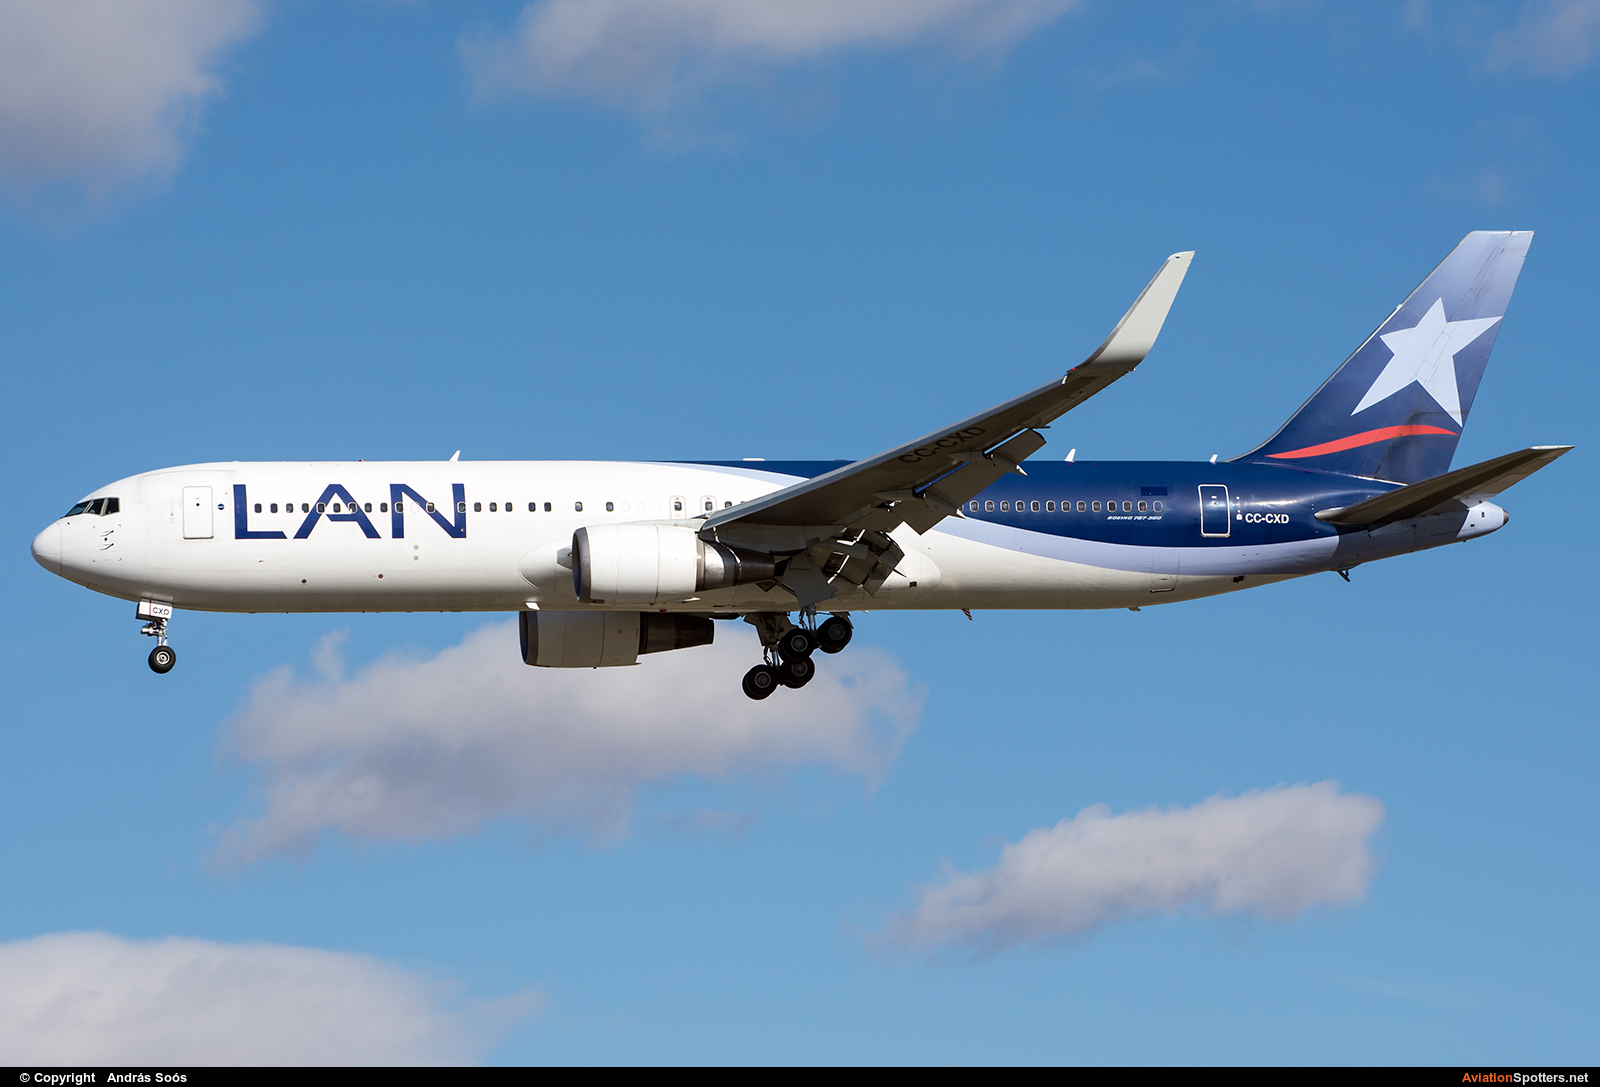 LAN Airlines  -  767-300ER  (CC-CXD) By András Soós (sas1965)